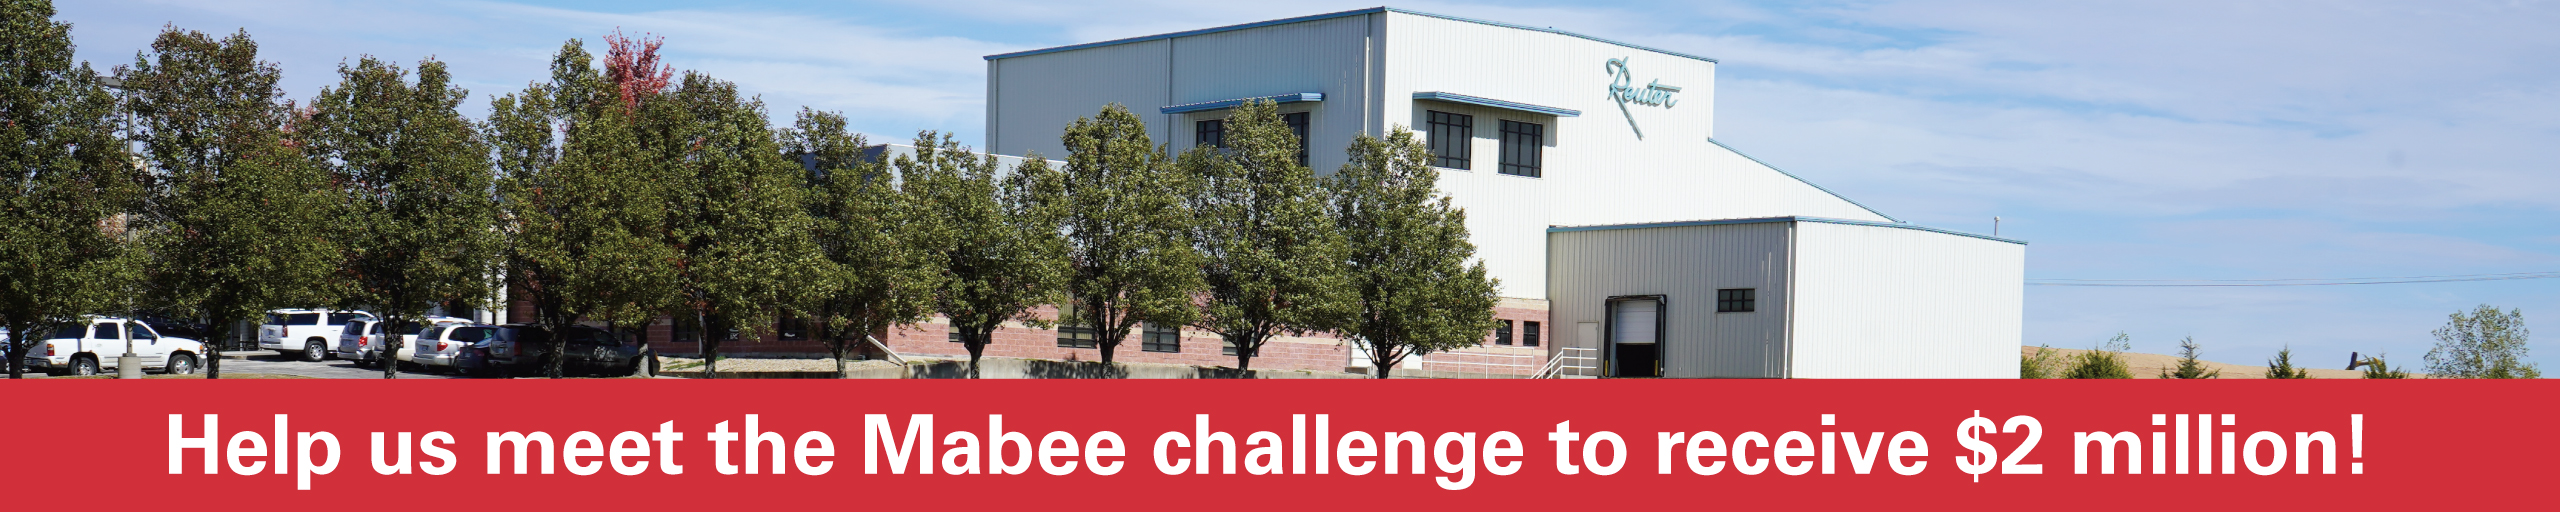 Help us meet the Mabee challenge to receive $2 million!